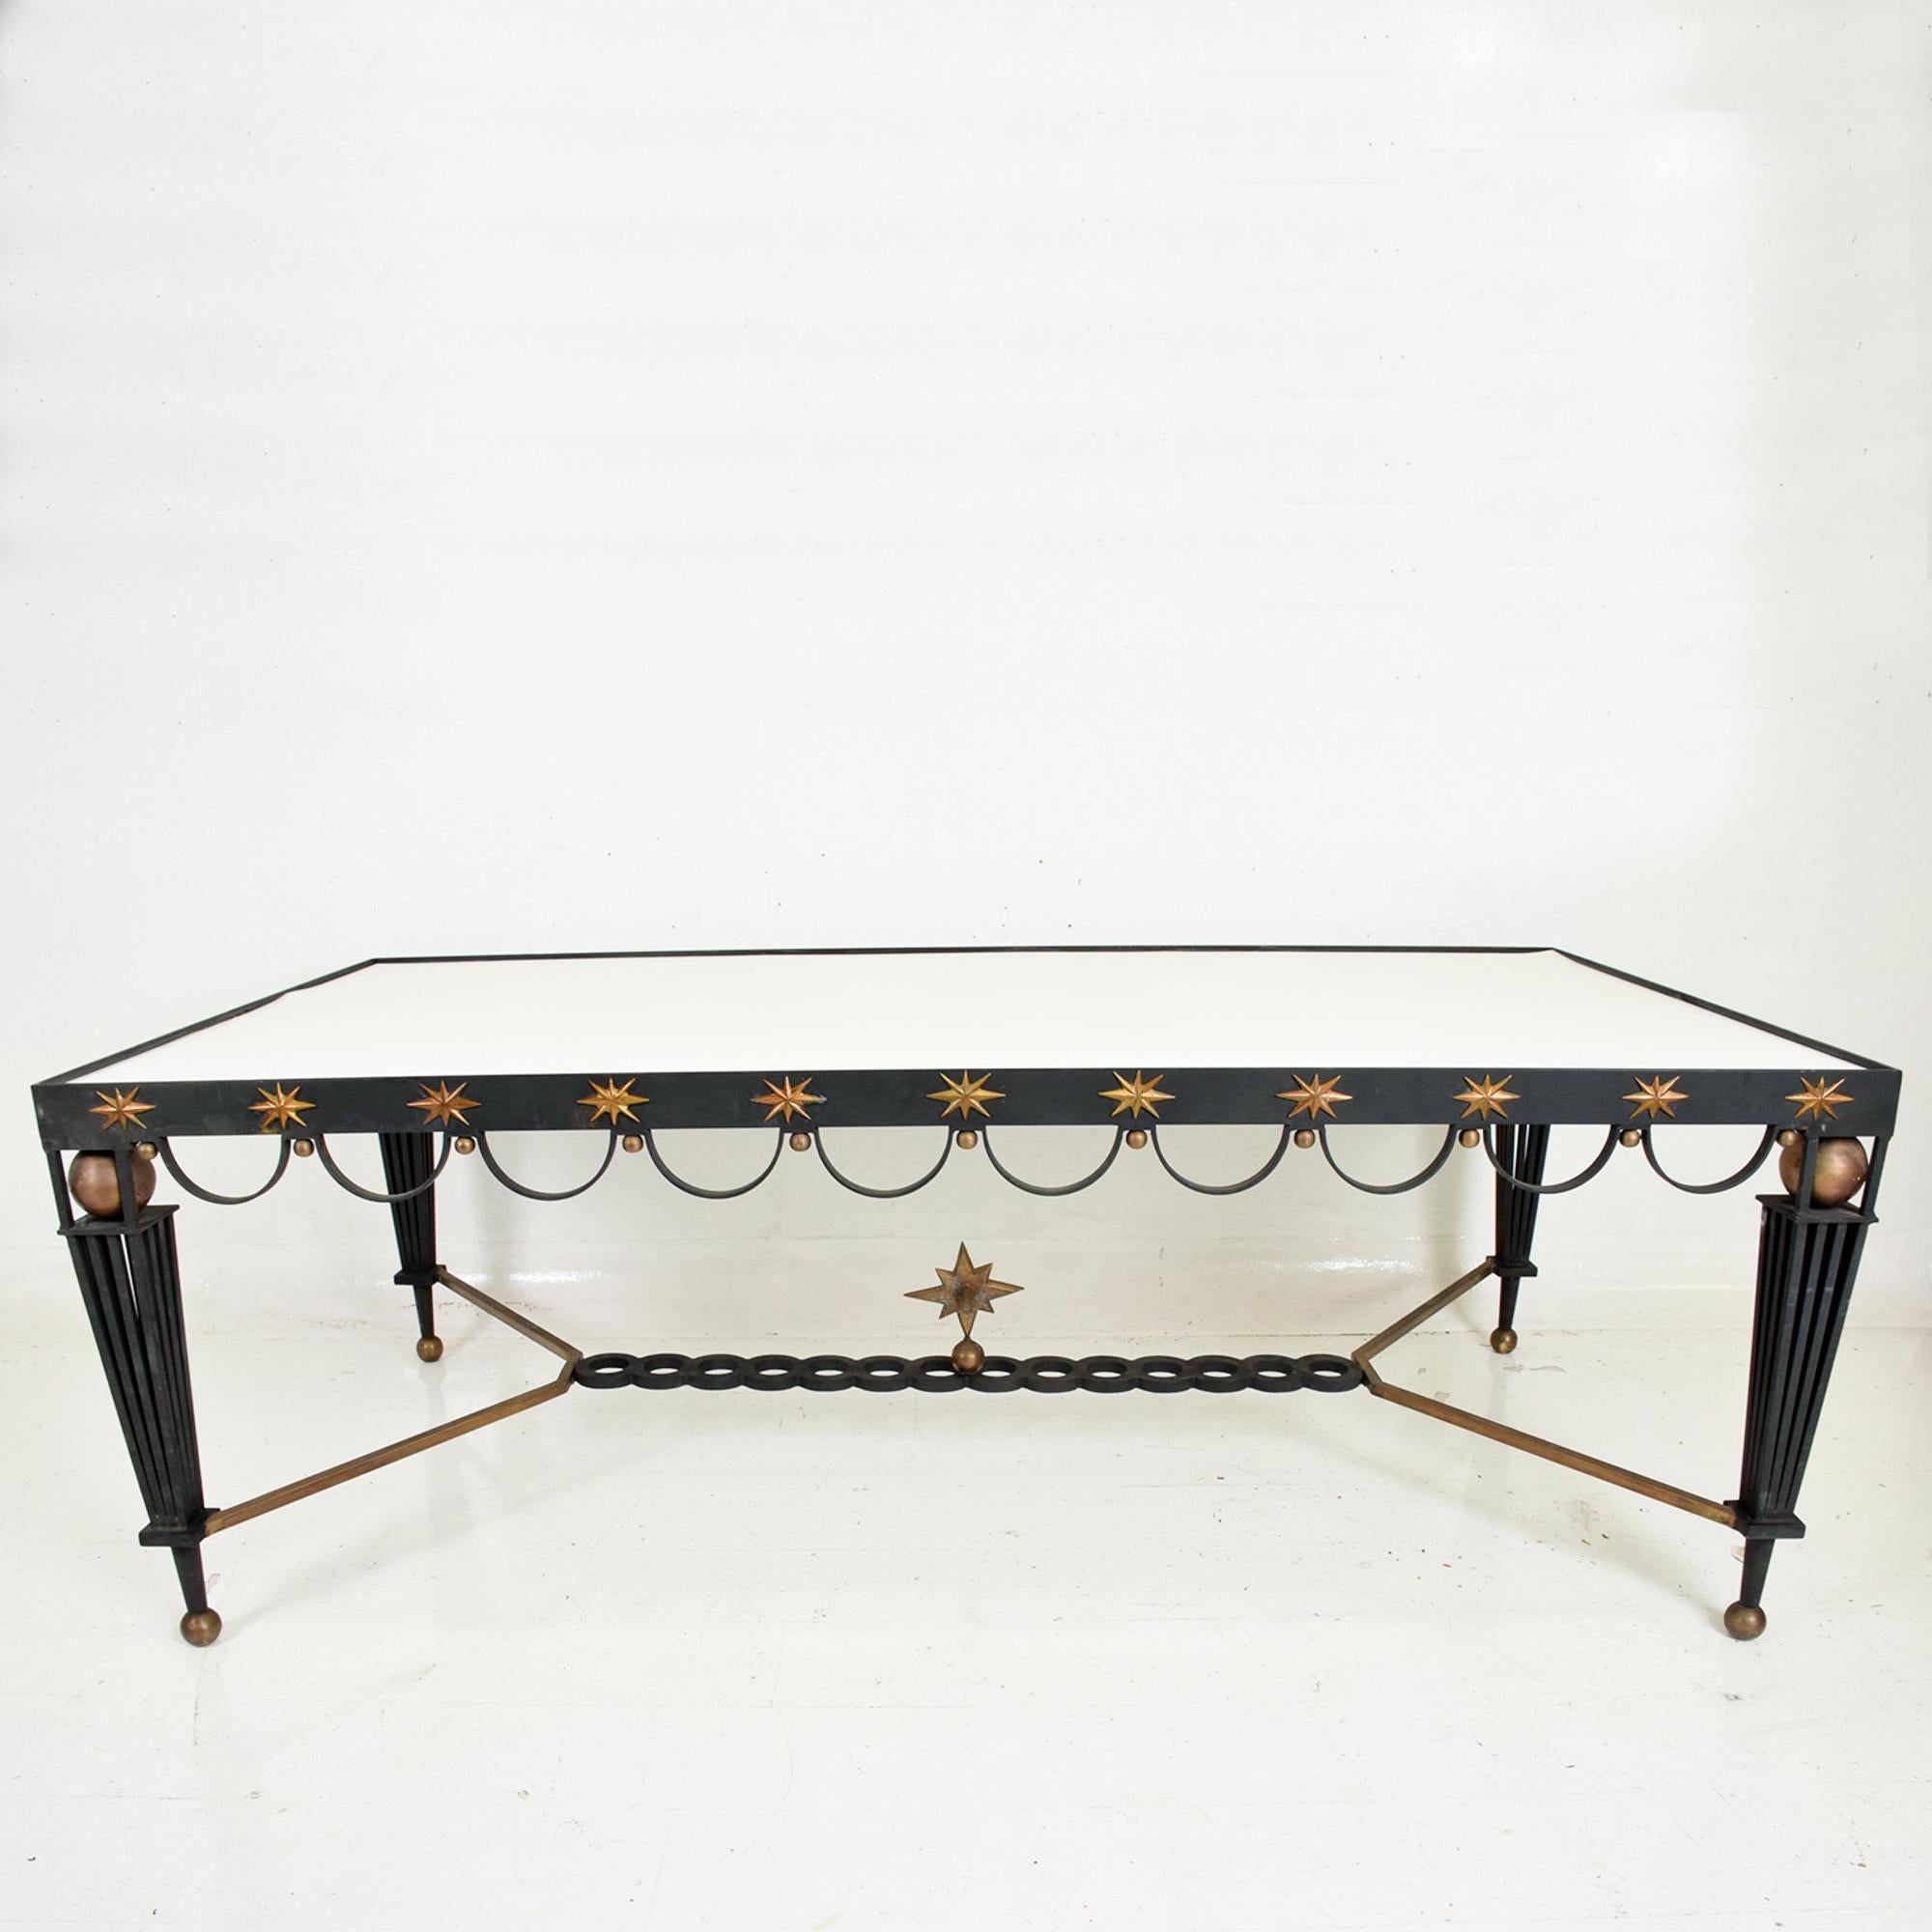 For your consideration, a mid century Mexican modernist star dining attributed to Arturo Pani. Design in the style of Gilbert Poillerat,

Mexico, circa the 1950s.



Iron painted in black with solid bronze accents. No table top included.